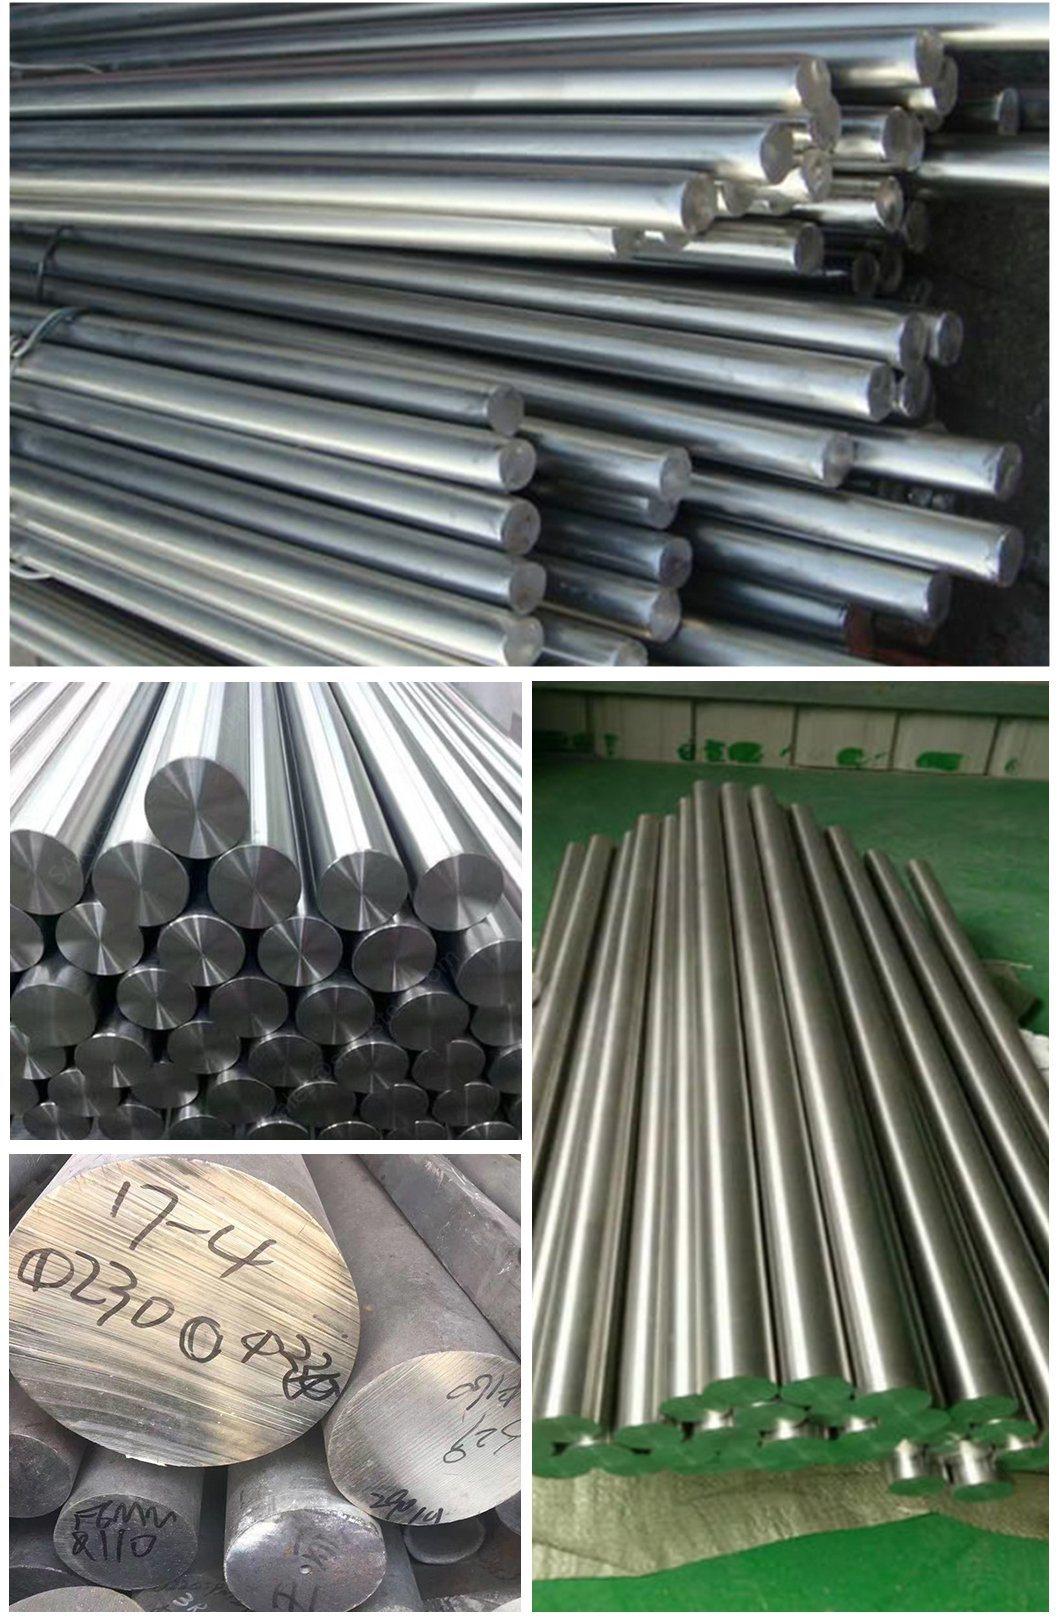 Prime Quality 1.4938 1.4872 1.4818 Stainless Steel Wire Rod 3mm Price